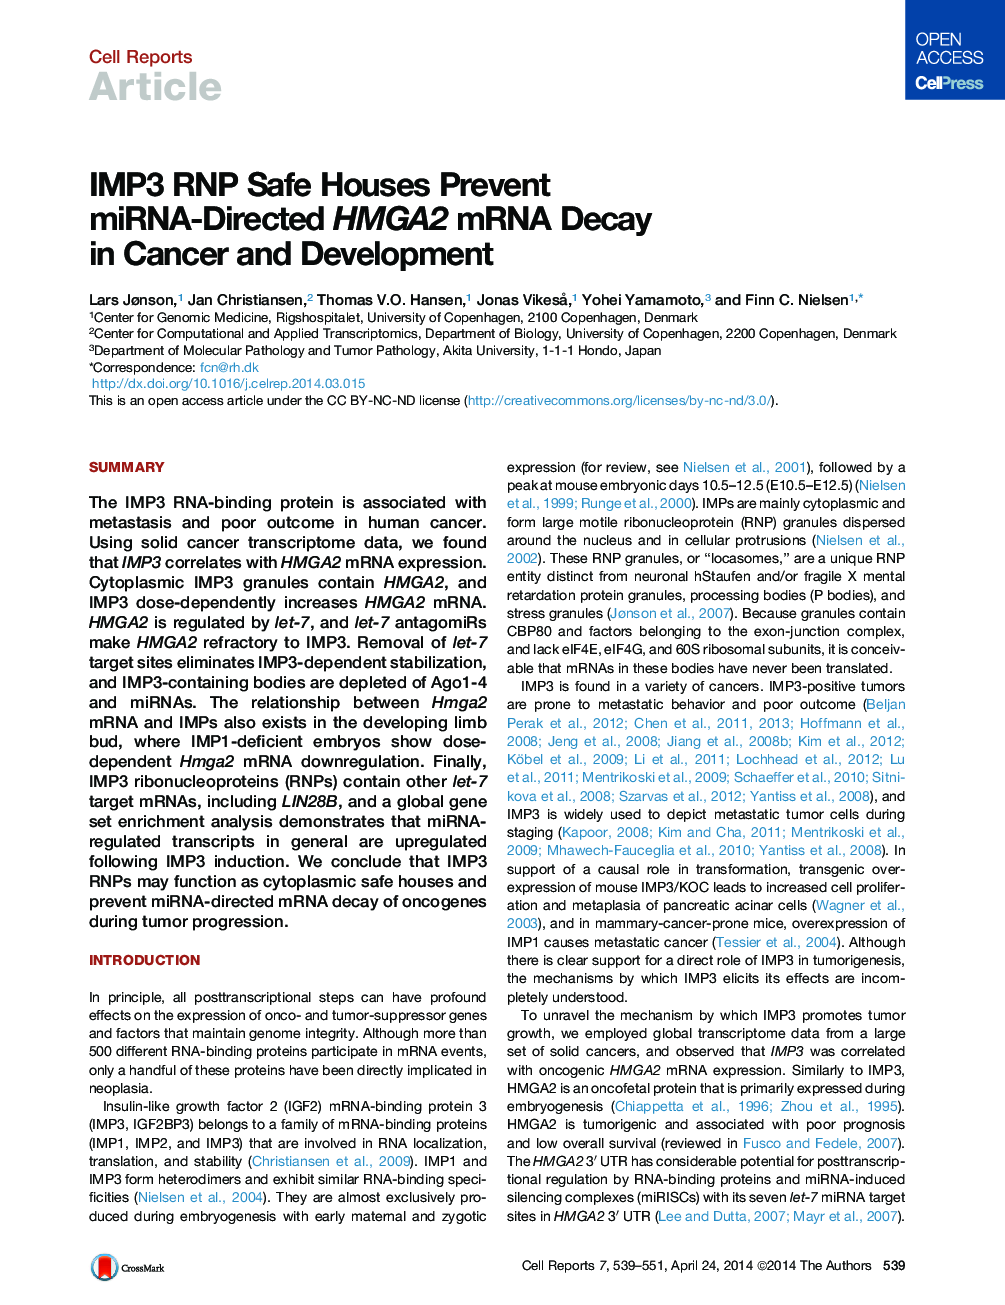 IMP3 RNP Safe Houses Prevent miRNA-Directed HMGA2 mRNA Decay in Cancer and Development 